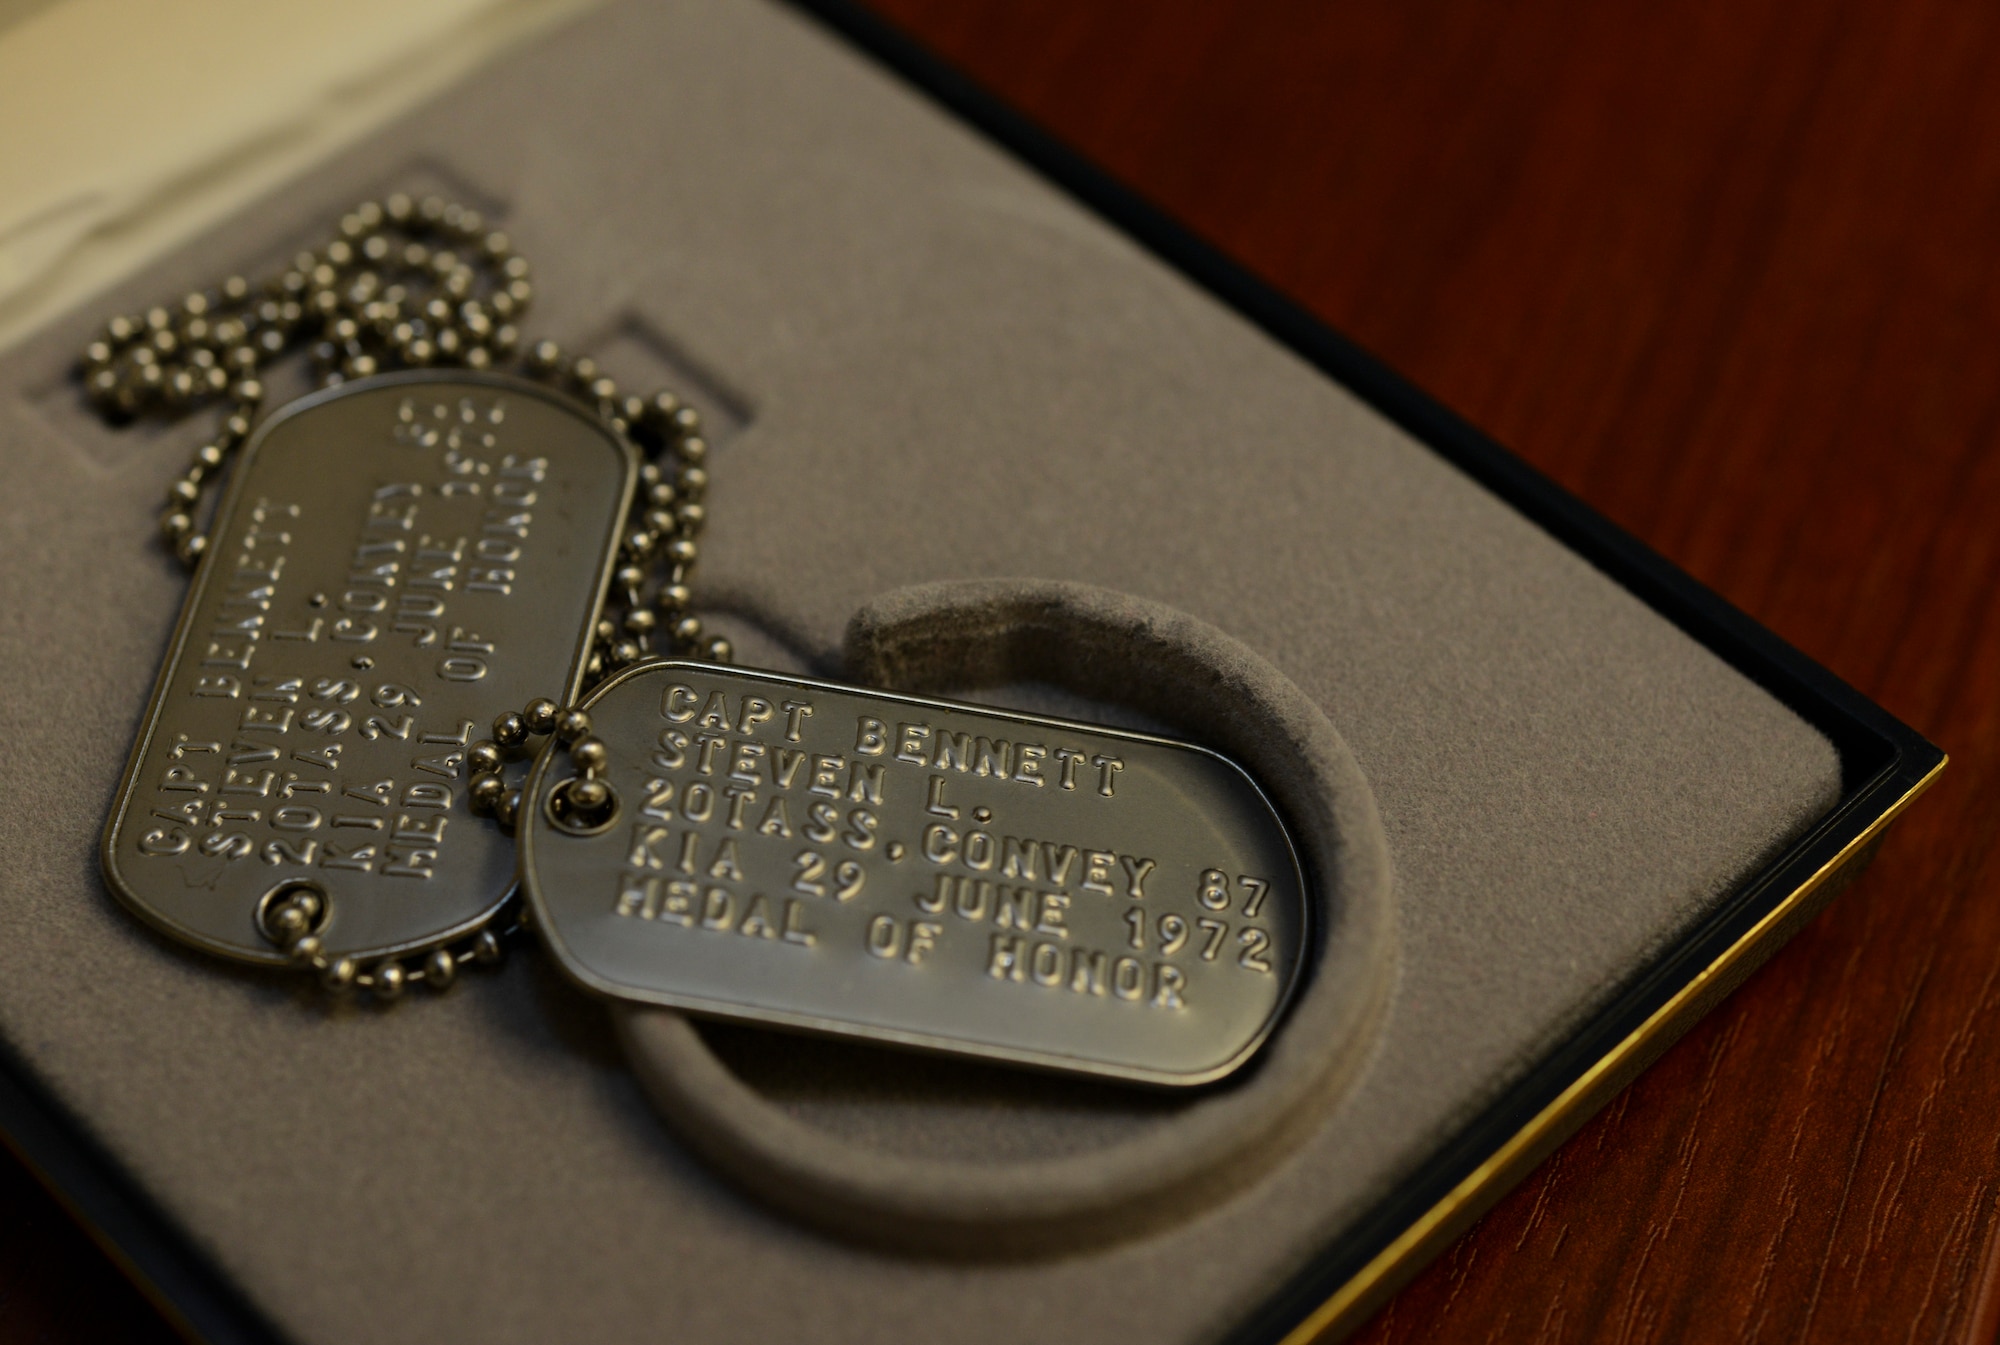 One pair of dog tags sitting in a box on a desk.